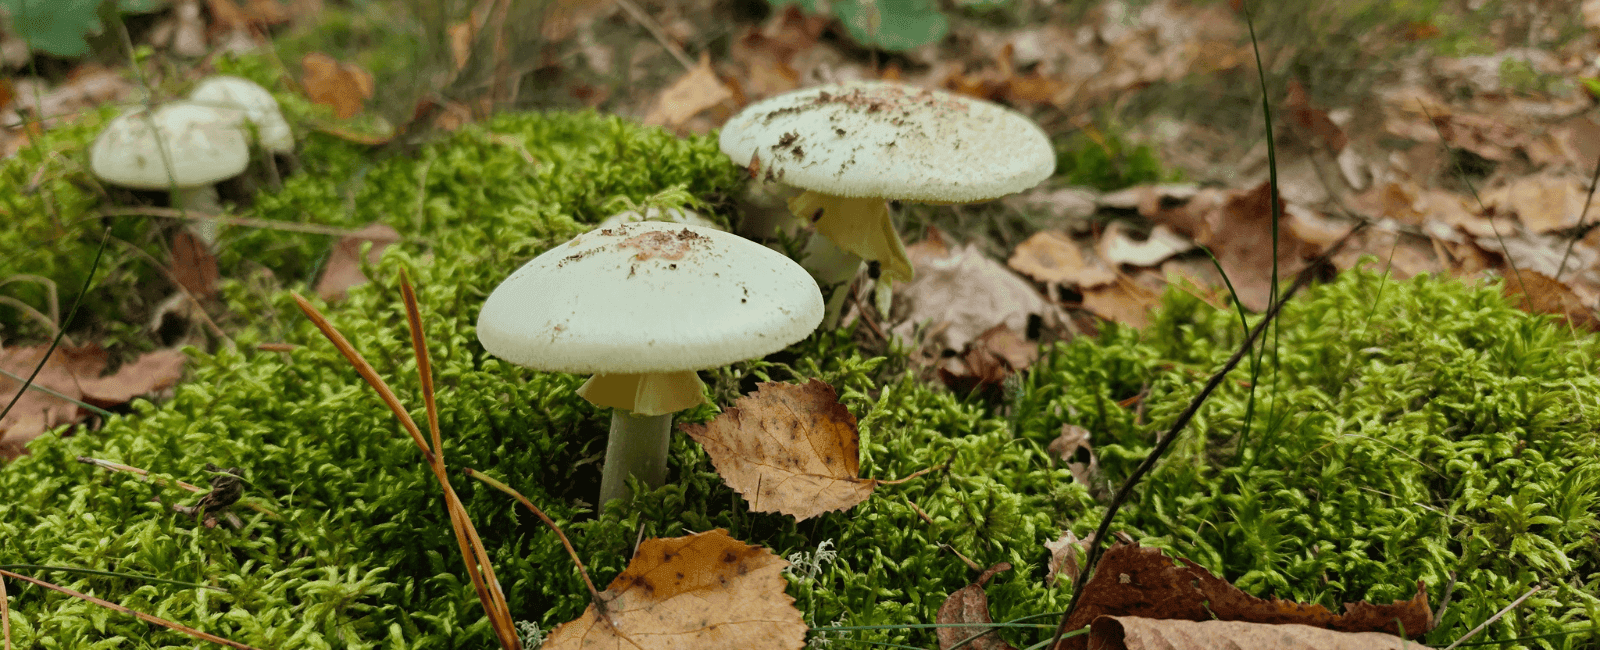 New Study Finds 'Death Cap' Mushrooms Can Reproduce Solo